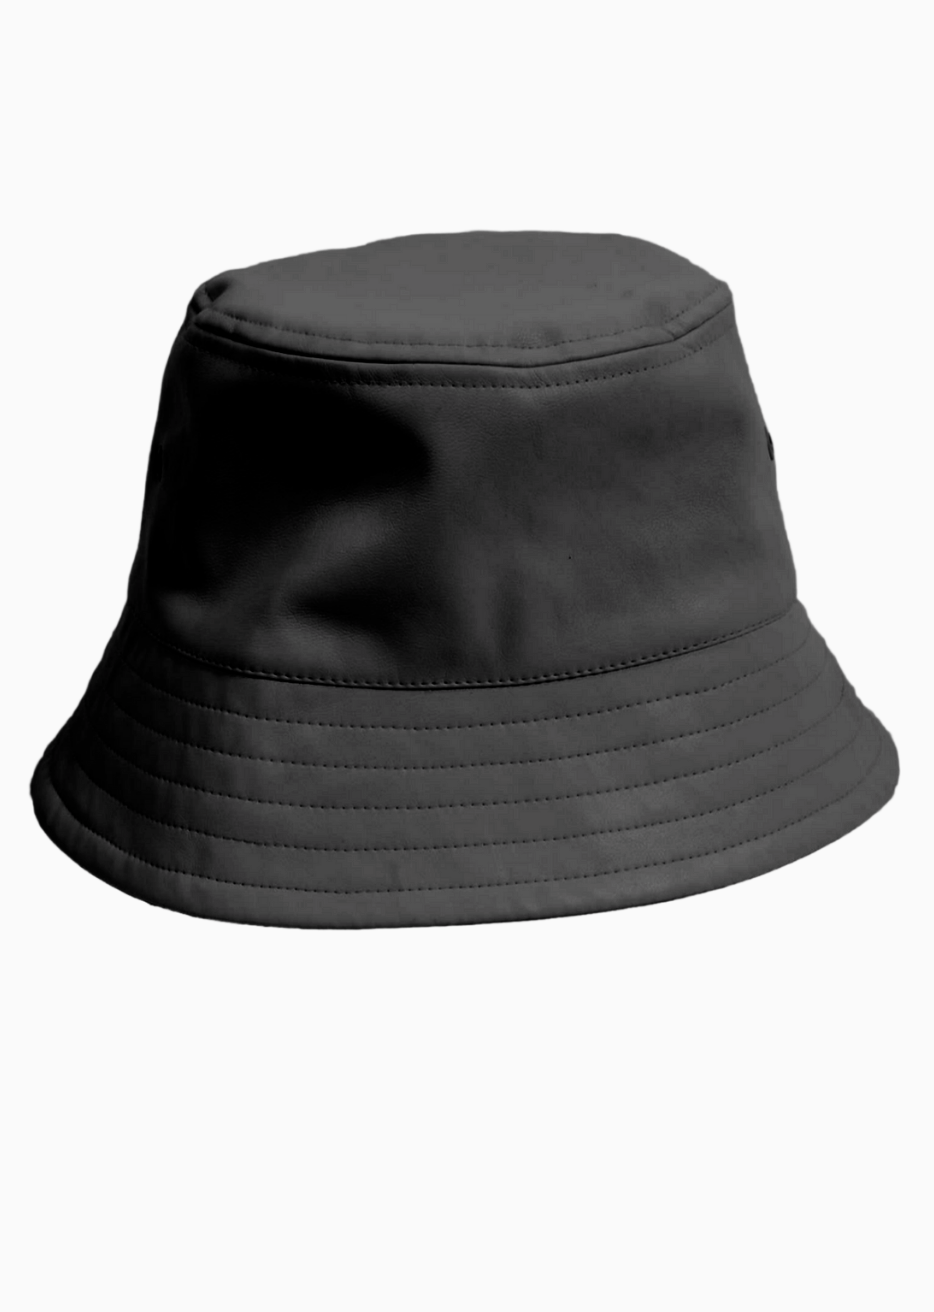 Stormi Black Bucket Hat Animal Free Leather Waterproof Sustainable Made in Canada